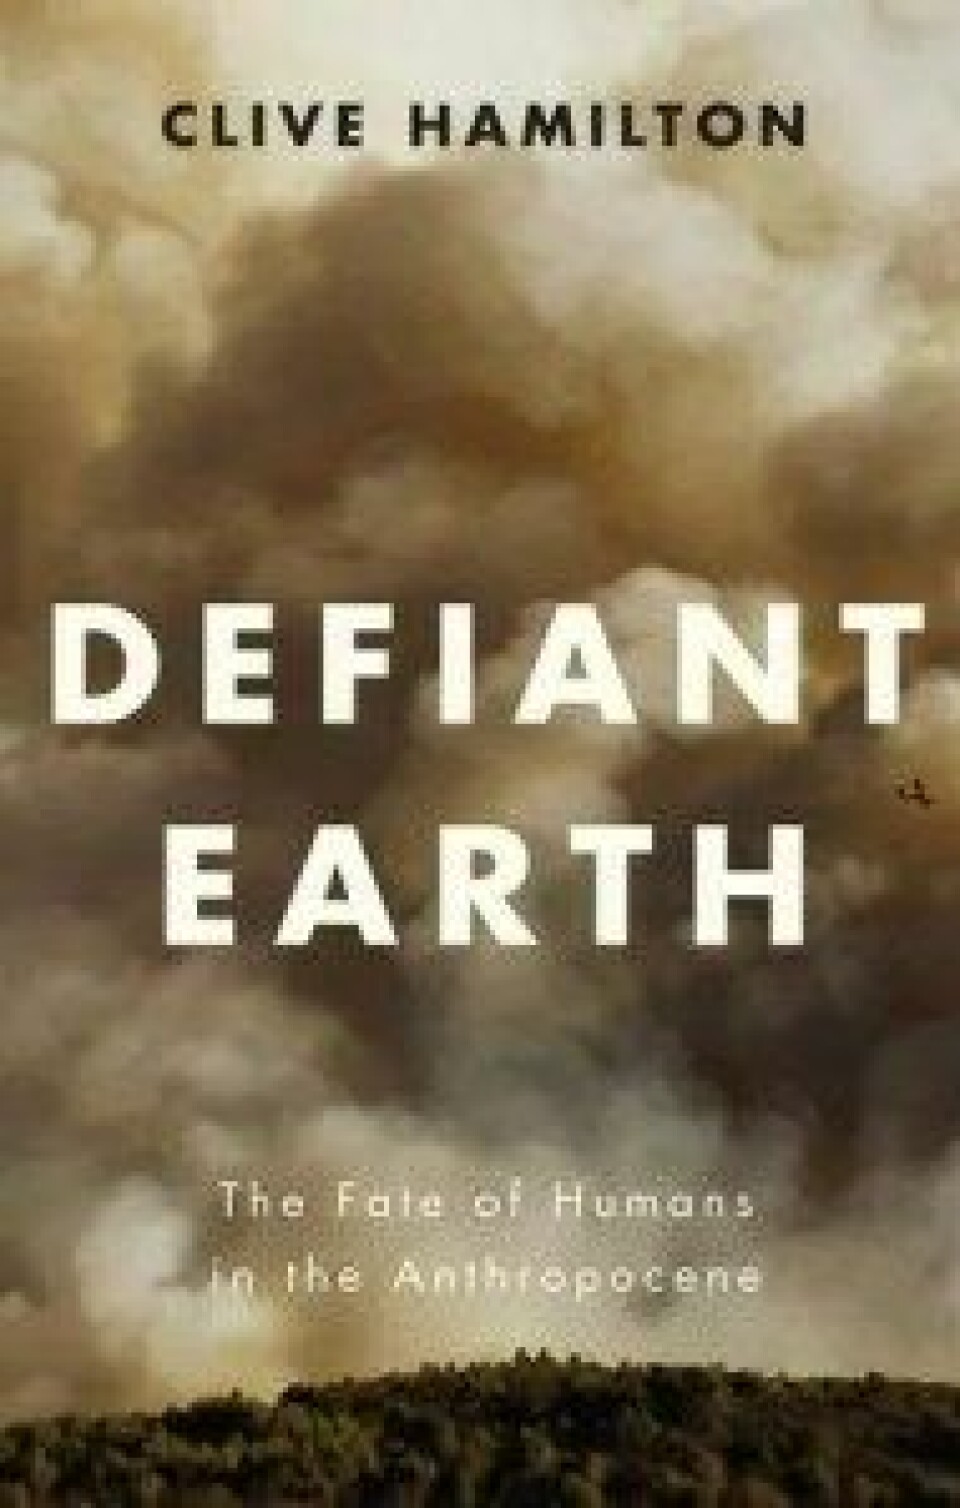 Defiant Earth: The Fate of Humans in the Anthropocene. Wiley, 2017.